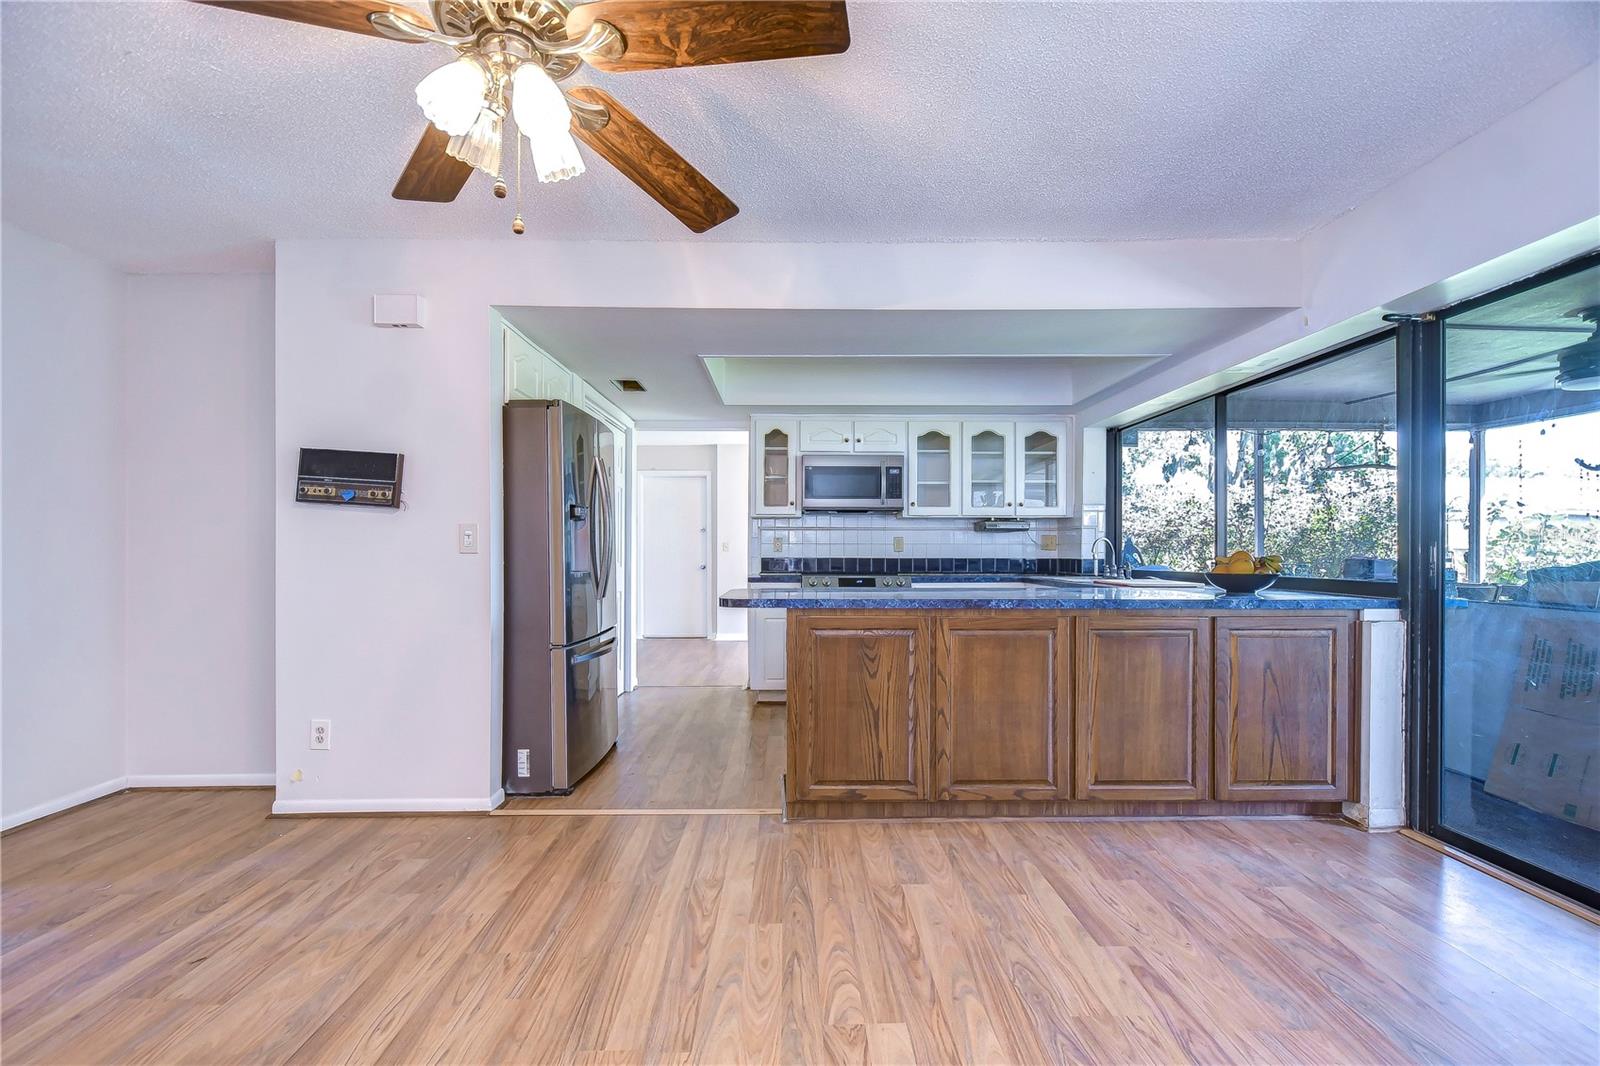 Tons of natural light throughout the home!